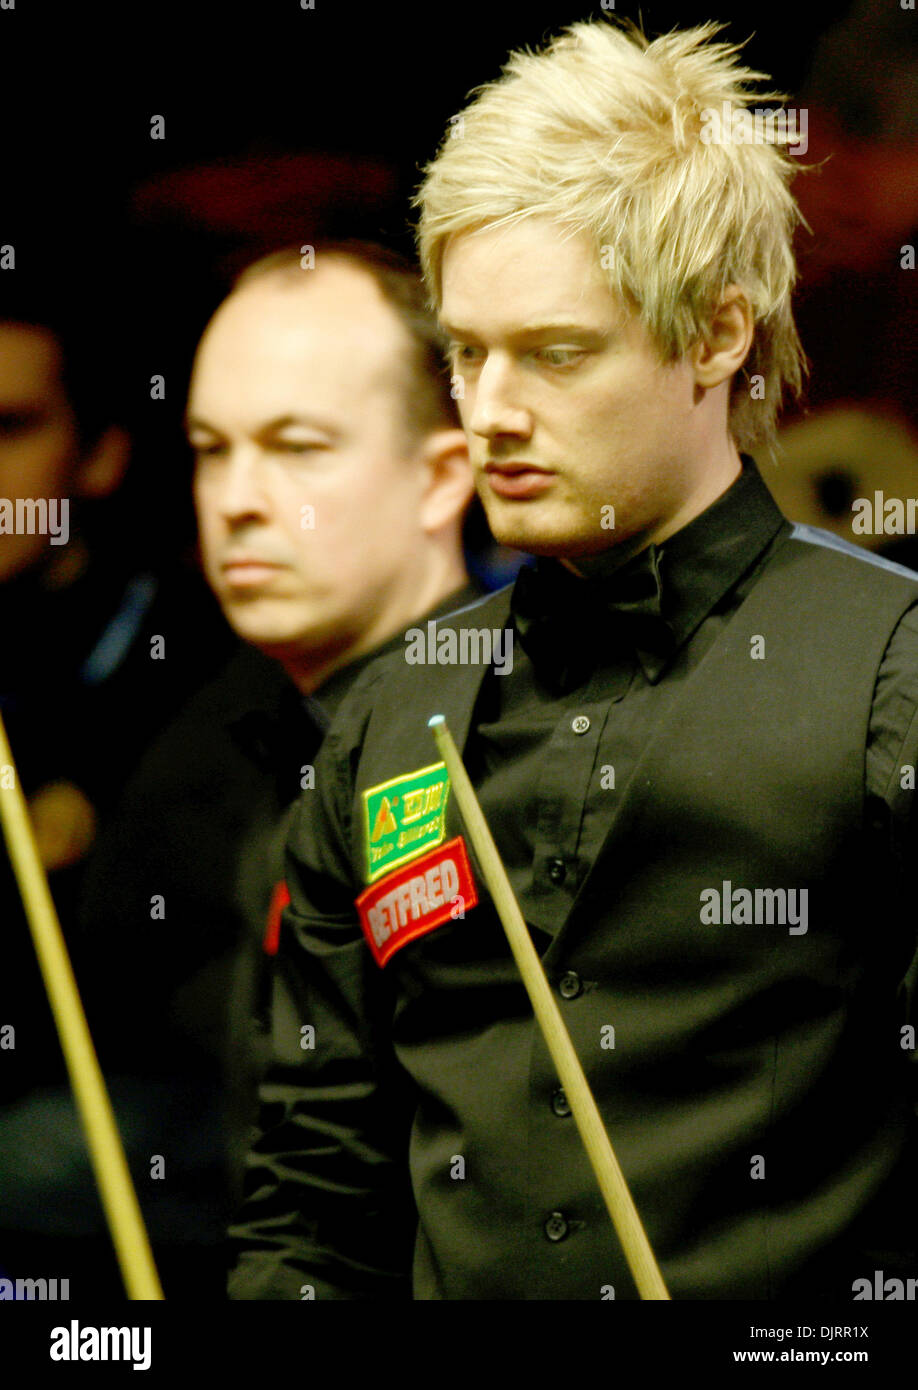 Apr. 20, 2010 - Sheffield, England - SHEFFIELD, ENGLAND - APRIL 20th :  Neil Robertson Australia, in action against  Fergal O'Brien of Ireland, during the 1st Round of the Betfred World Snooker Championships at the Crucible Theater in Sheffield, England. (Credit Image: © Michael Cullen/Southcreek Global/ZUMApress.com) Stock Photo